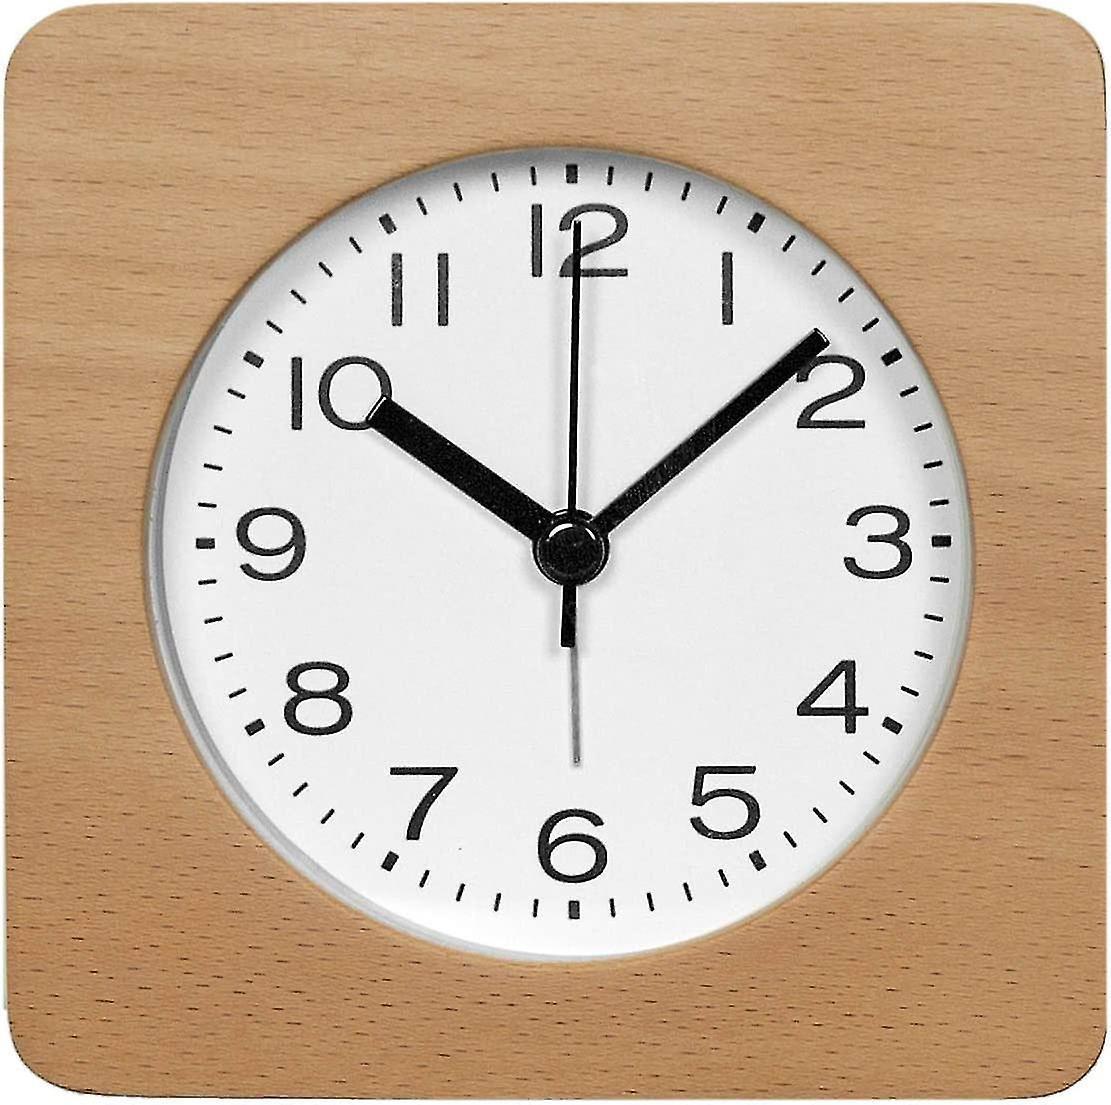 3 Inch Square Wooden Alarm Clock With Arabic Numerals, No Tick, Backlight, Battery Powered, Natural (natural Wood Color) (1pcs)